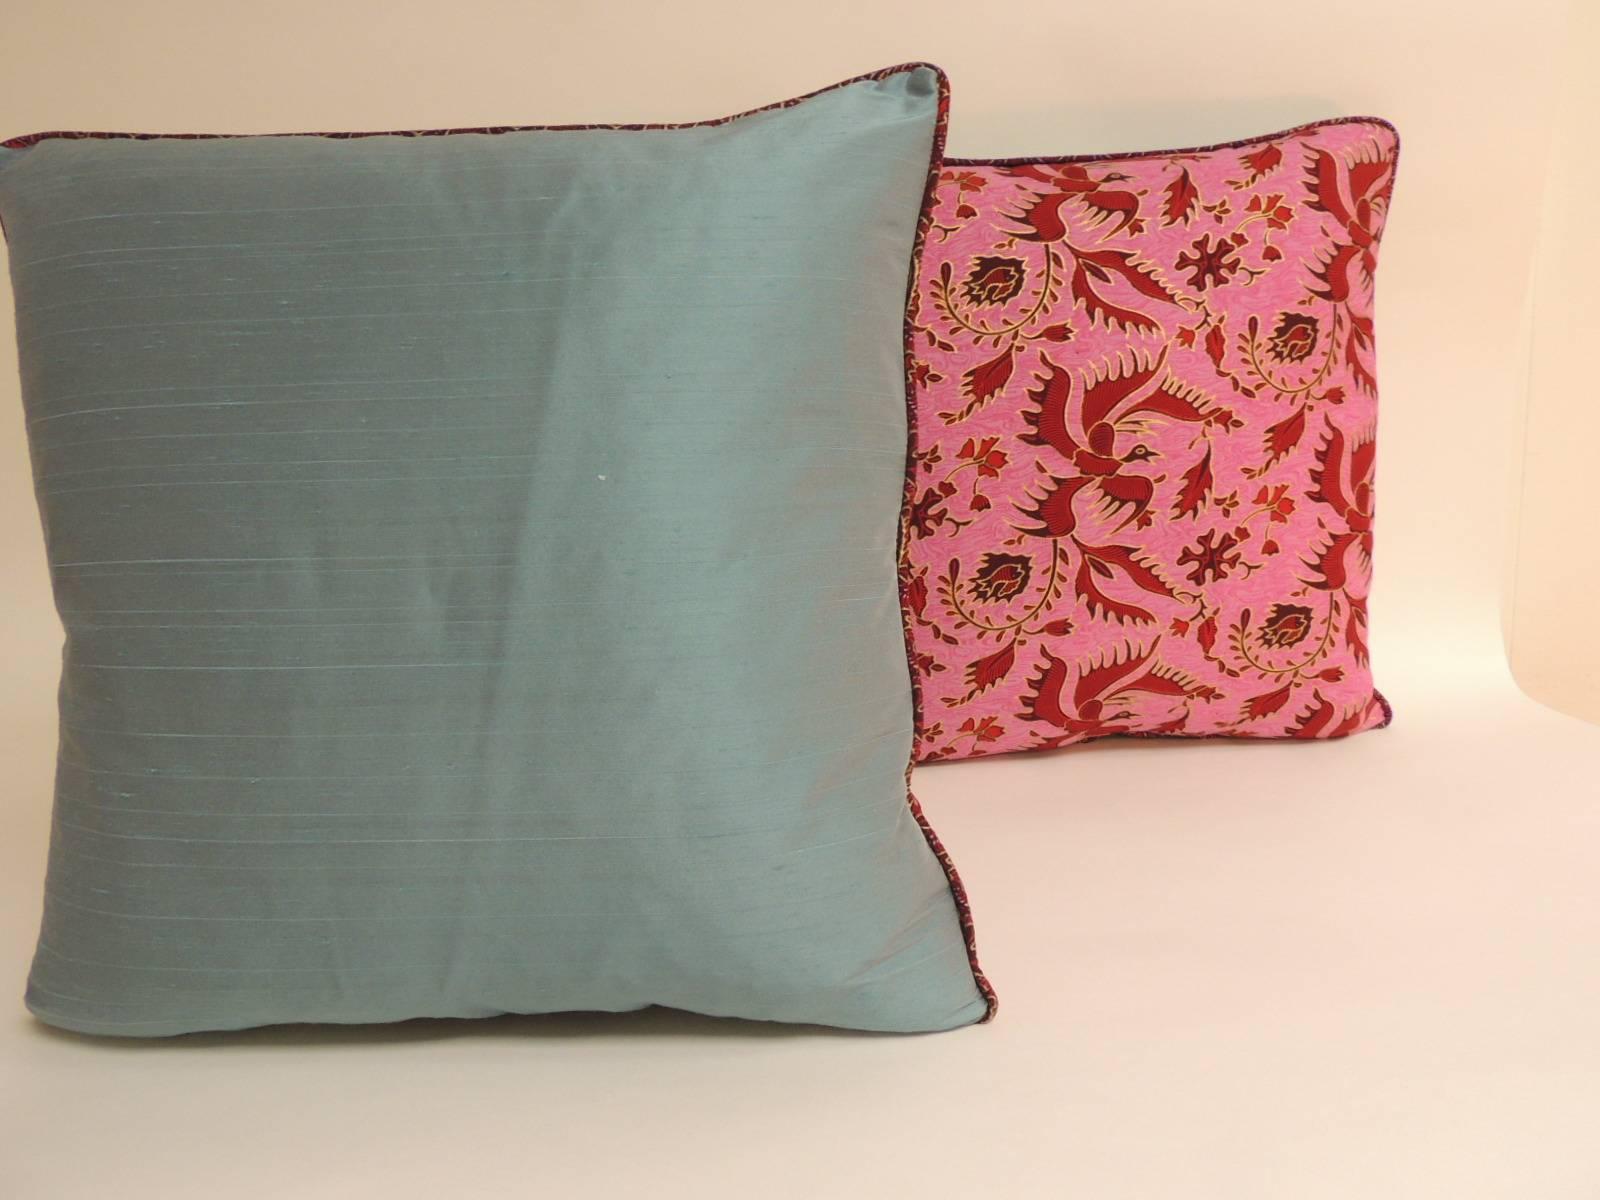 Asian Pair of Vintage Red and Pink Hand-Blocked Batik Decorative Pillows